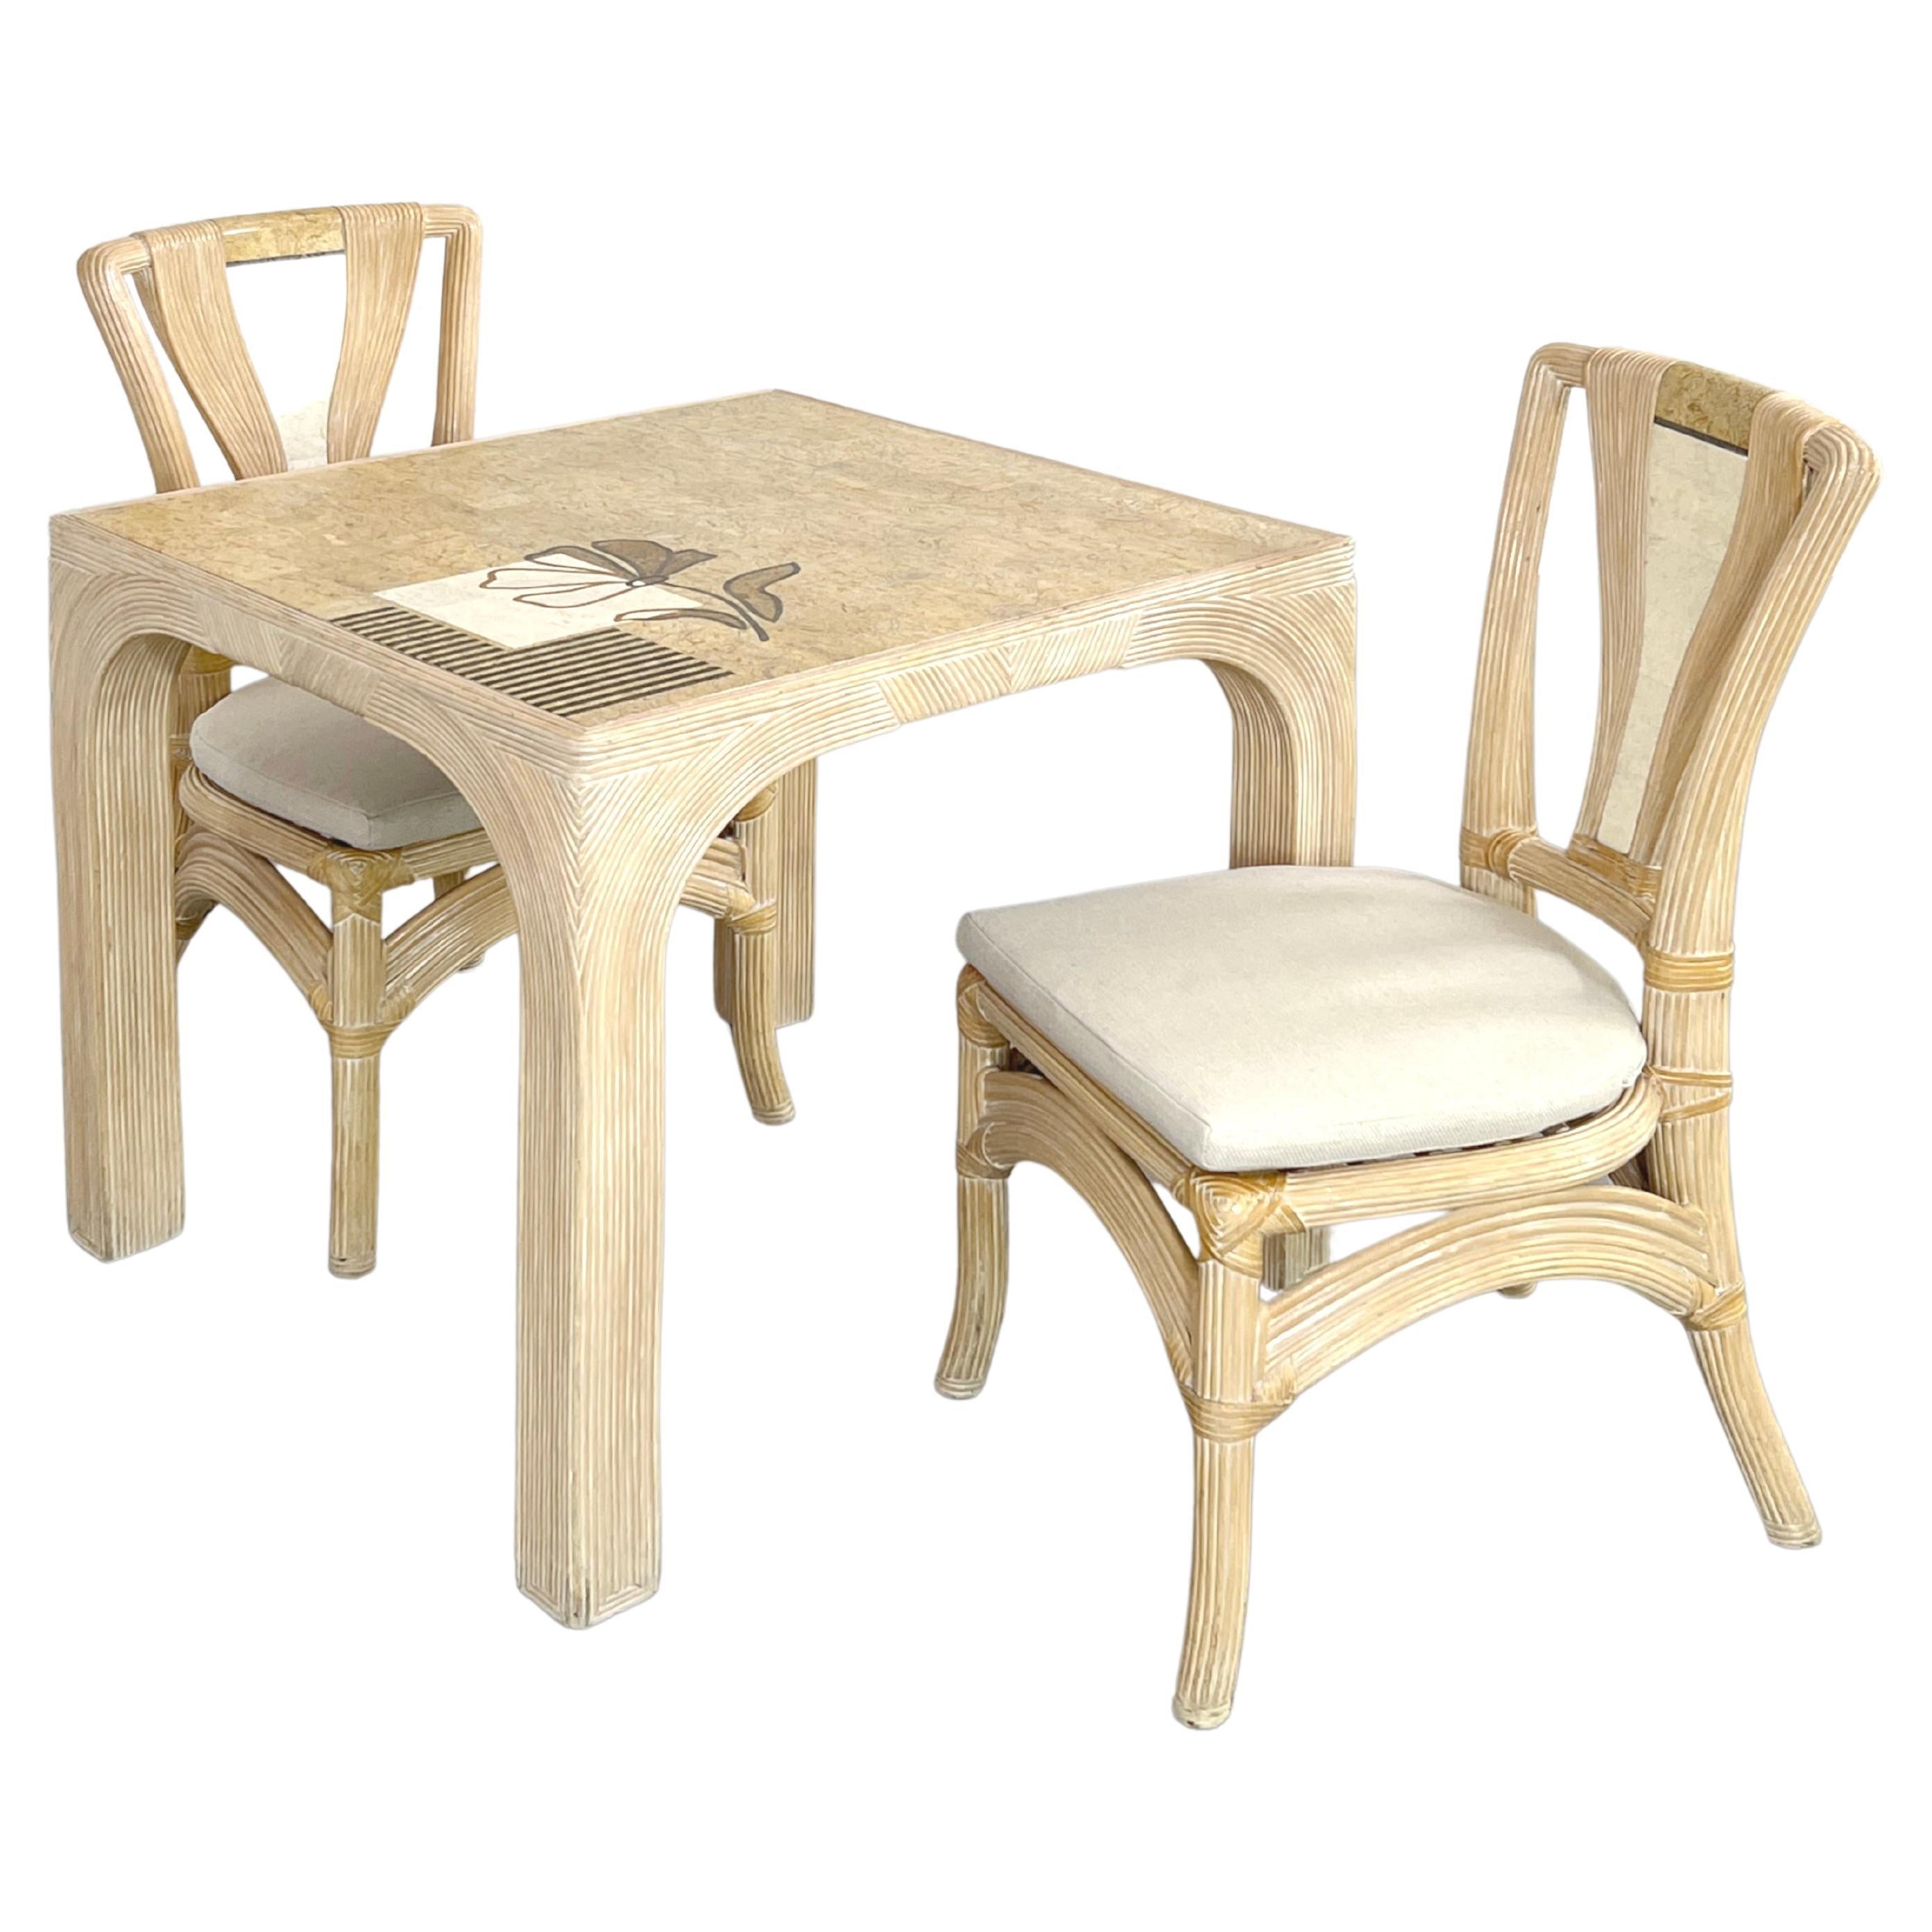 Pencil Reed Rattan And Tessellated Stone Marquetry Pedestal Table And Chairs For Sale